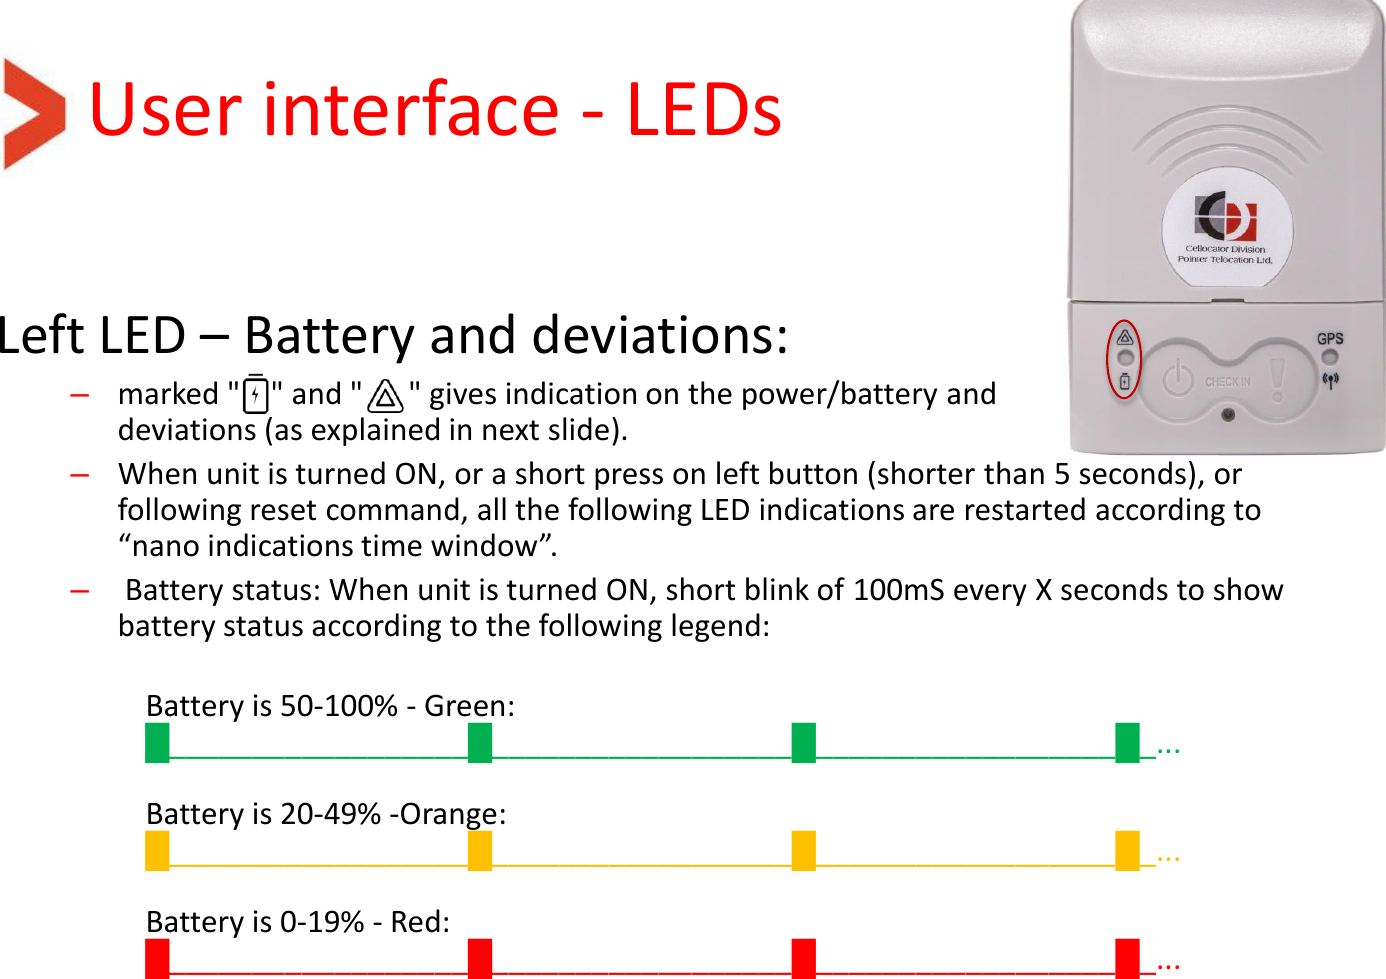 User interface - LEDs Left LED – Battery and deviations: –marked &quot;    &quot; and &quot;      &quot; gives indication on the power/battery and deviations (as explained in next slide). –When unit is turned ON, or a short press on left button (shorter than 5 seconds), or following reset command, all the following LED indications are restarted according to “nano indications time window”.  – Battery status: When unit is turned ON, short blink of 100mS every X seconds to show battery status according to the following legend:  Battery is 50-100% - Green: █__________________█__________________█__________________█_...   Battery is 20-49% -Orange: █__________________█__________________█__________________█_...   Battery is 0-19% - Red: █__________________█__________________█__________________█_...     